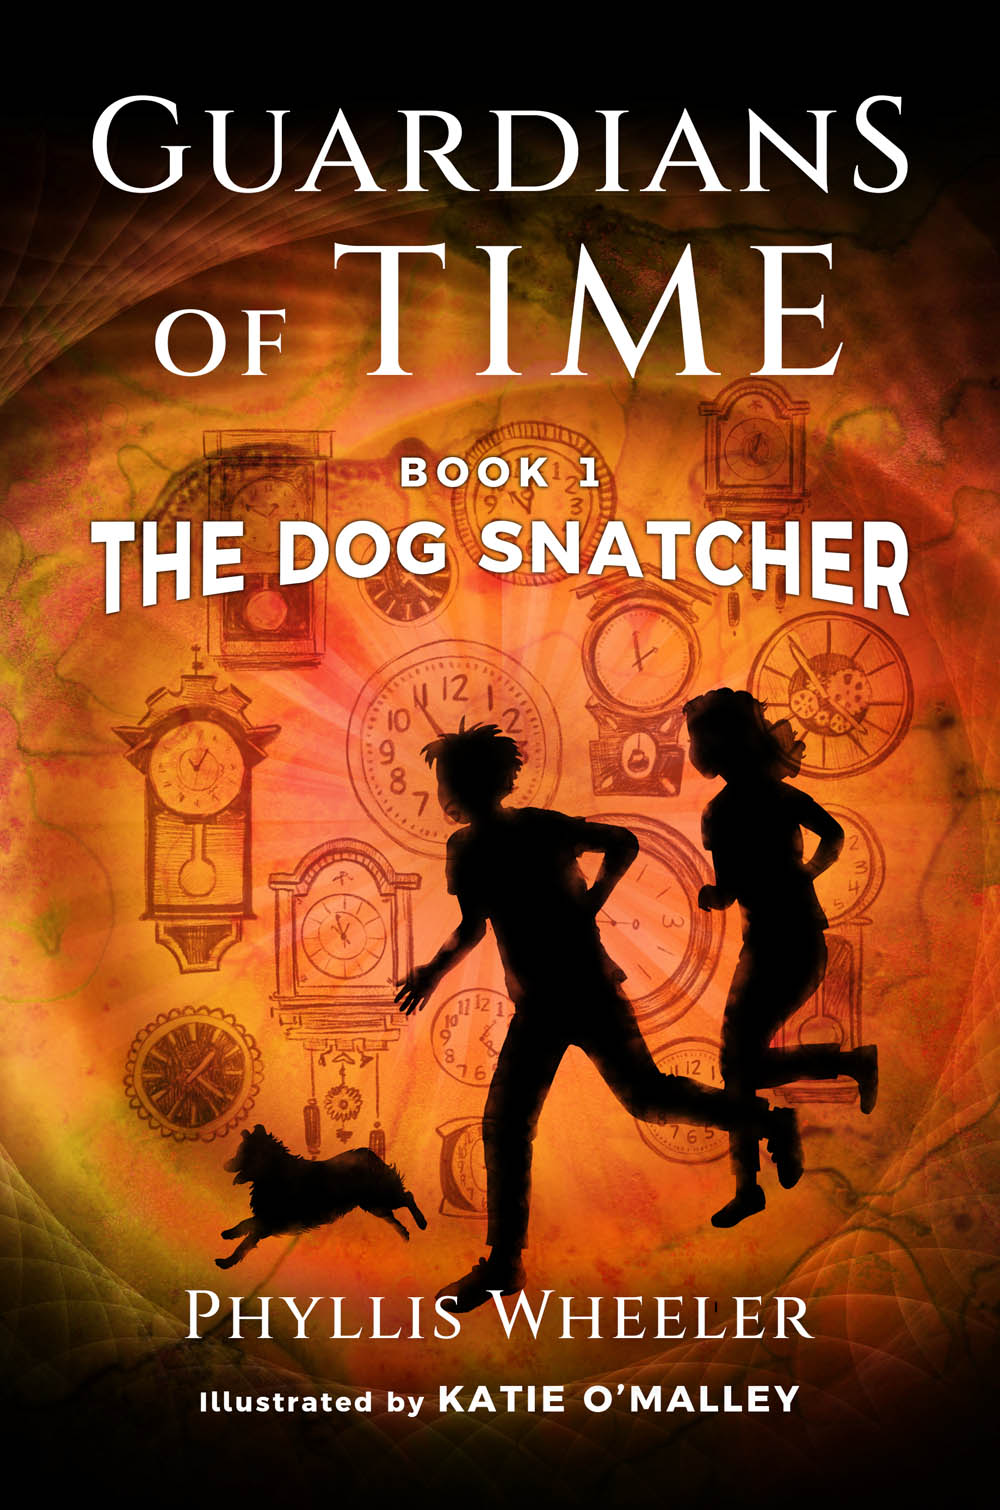 The Dog Snatcher: Guardians of Time Book 1